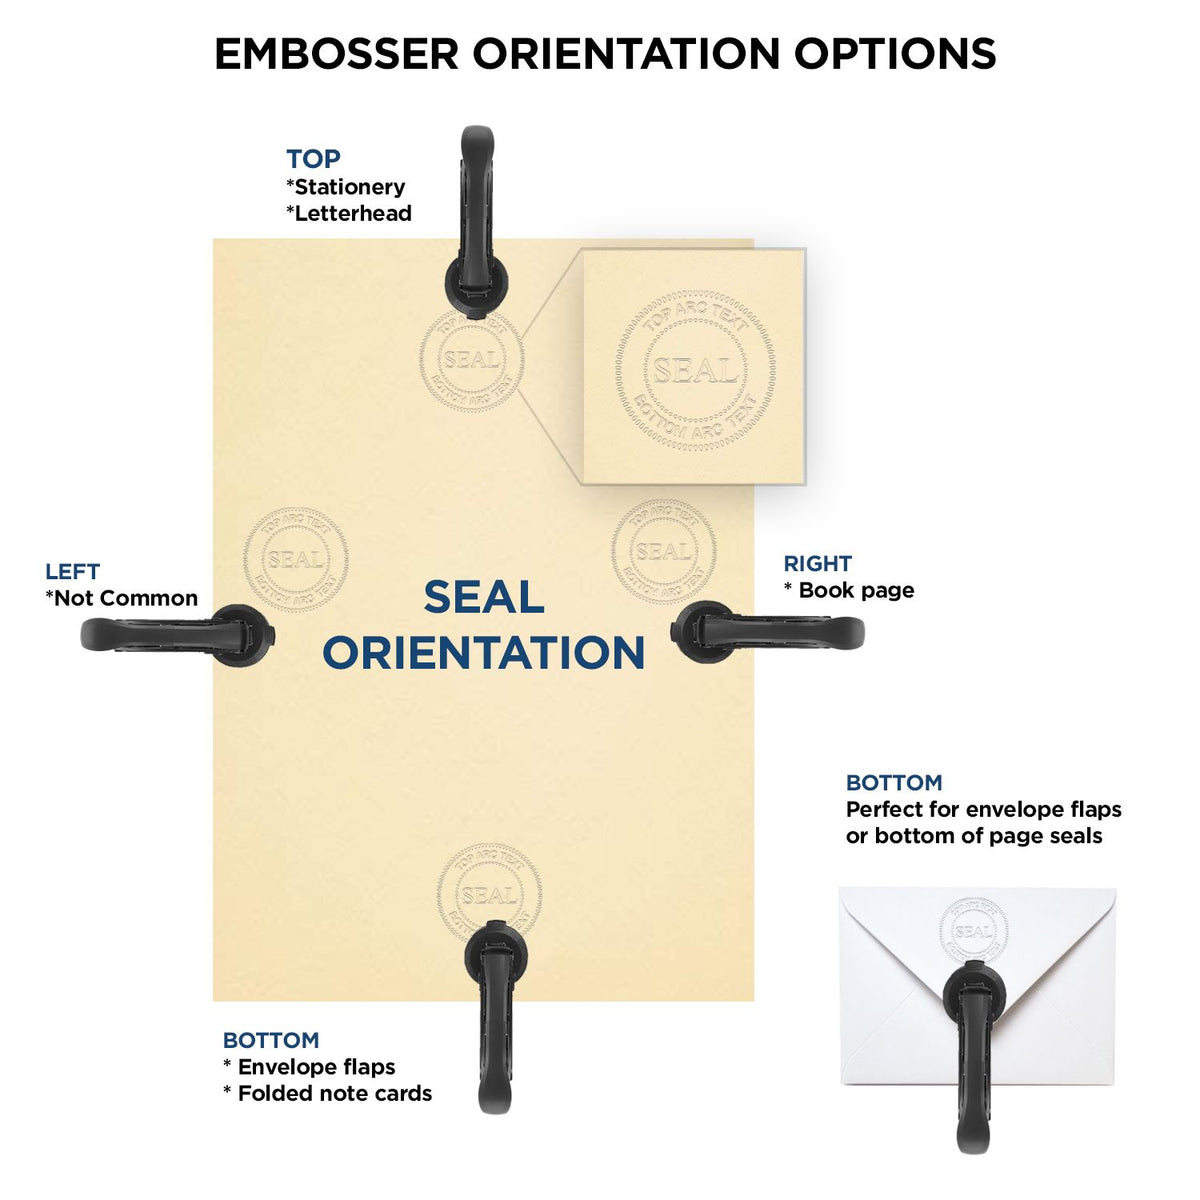 An infographic for the Heavy Duty Cast Iron Idaho Geologist Seal Embosser showing embosser orientation, this is showing examples of a top, bottom, right and left insert.